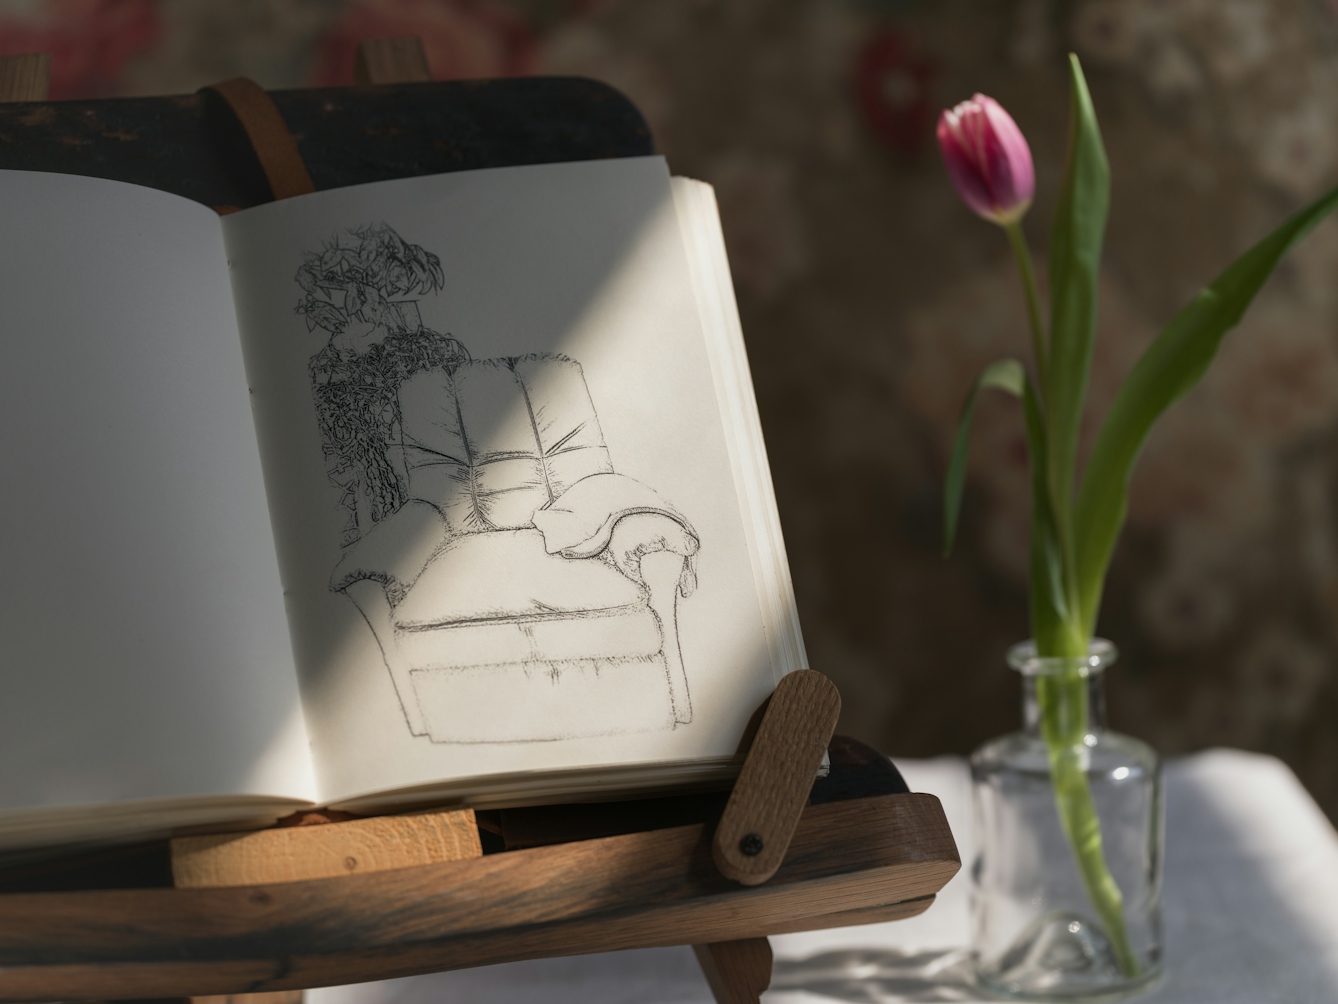 Photograph of a notebook on a wooden book stand, lit by a window from the right, casting a shadow on half of the page. On the right page there is a sketch of an empty armchair. To the right of the book a single tulip in a small glass vase. 